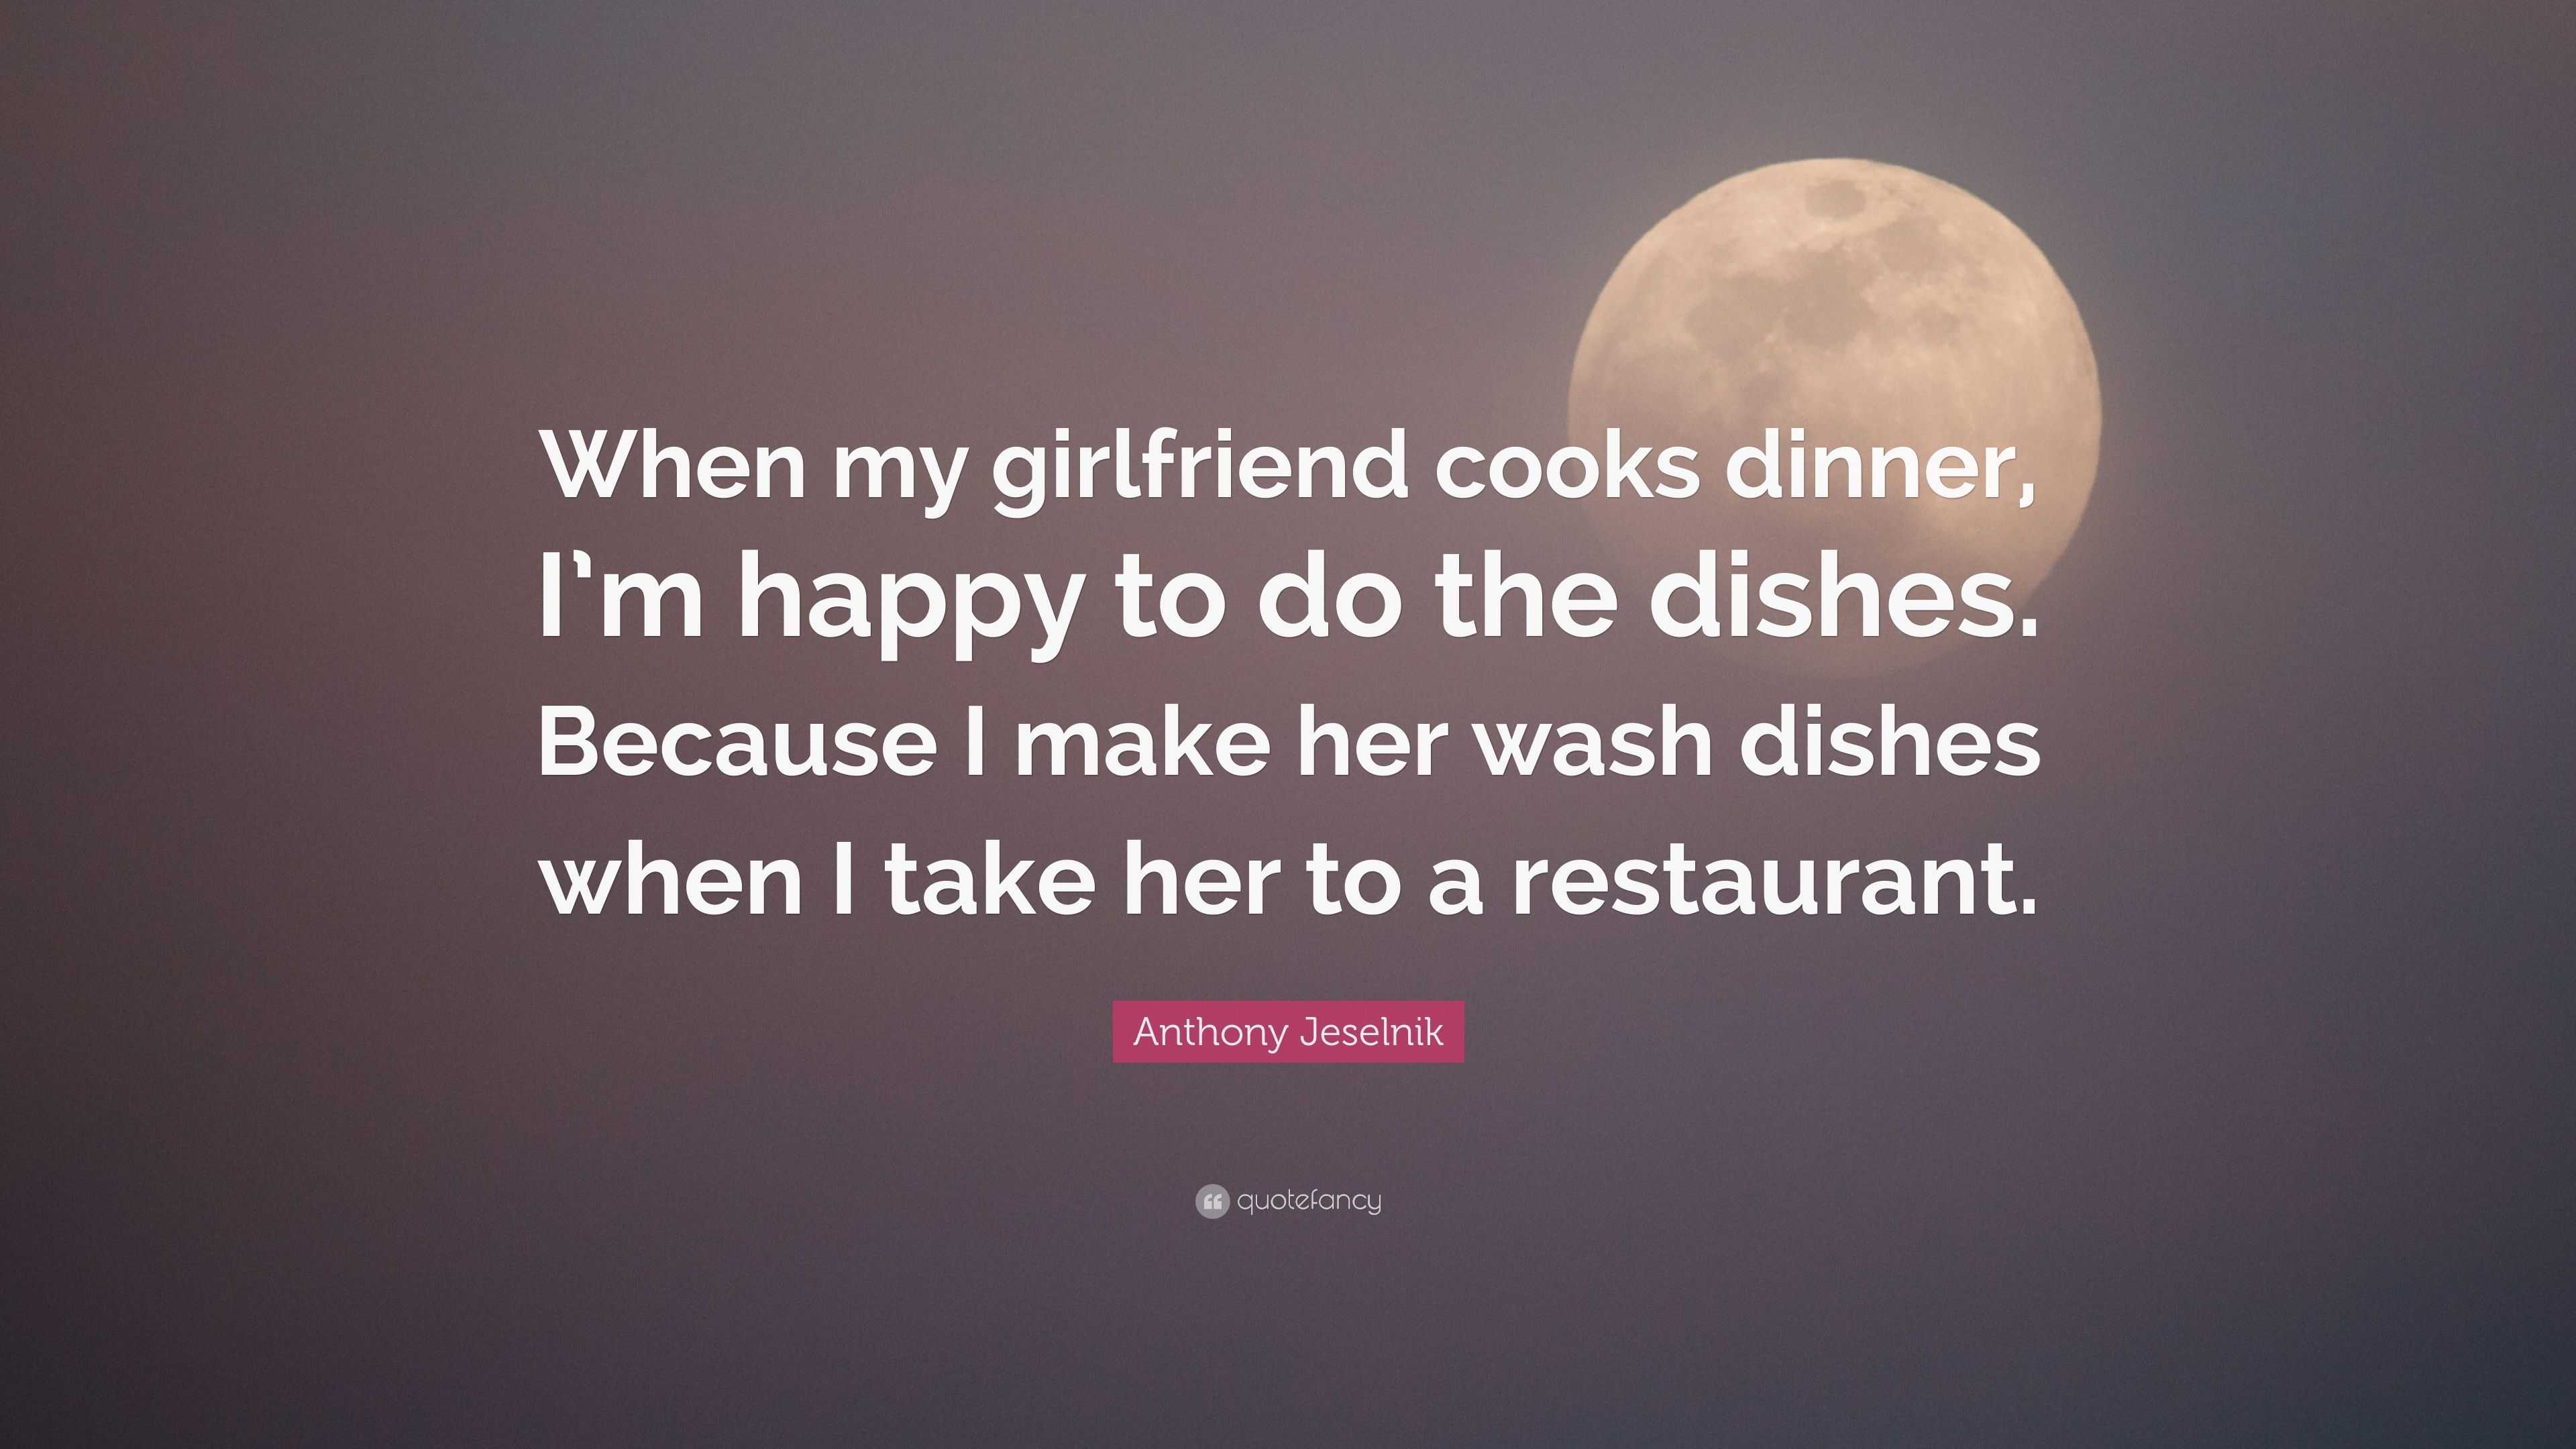 Anthony Jeselnik Quote: “When my girlfriend cooks dinner, I’m happy to ...